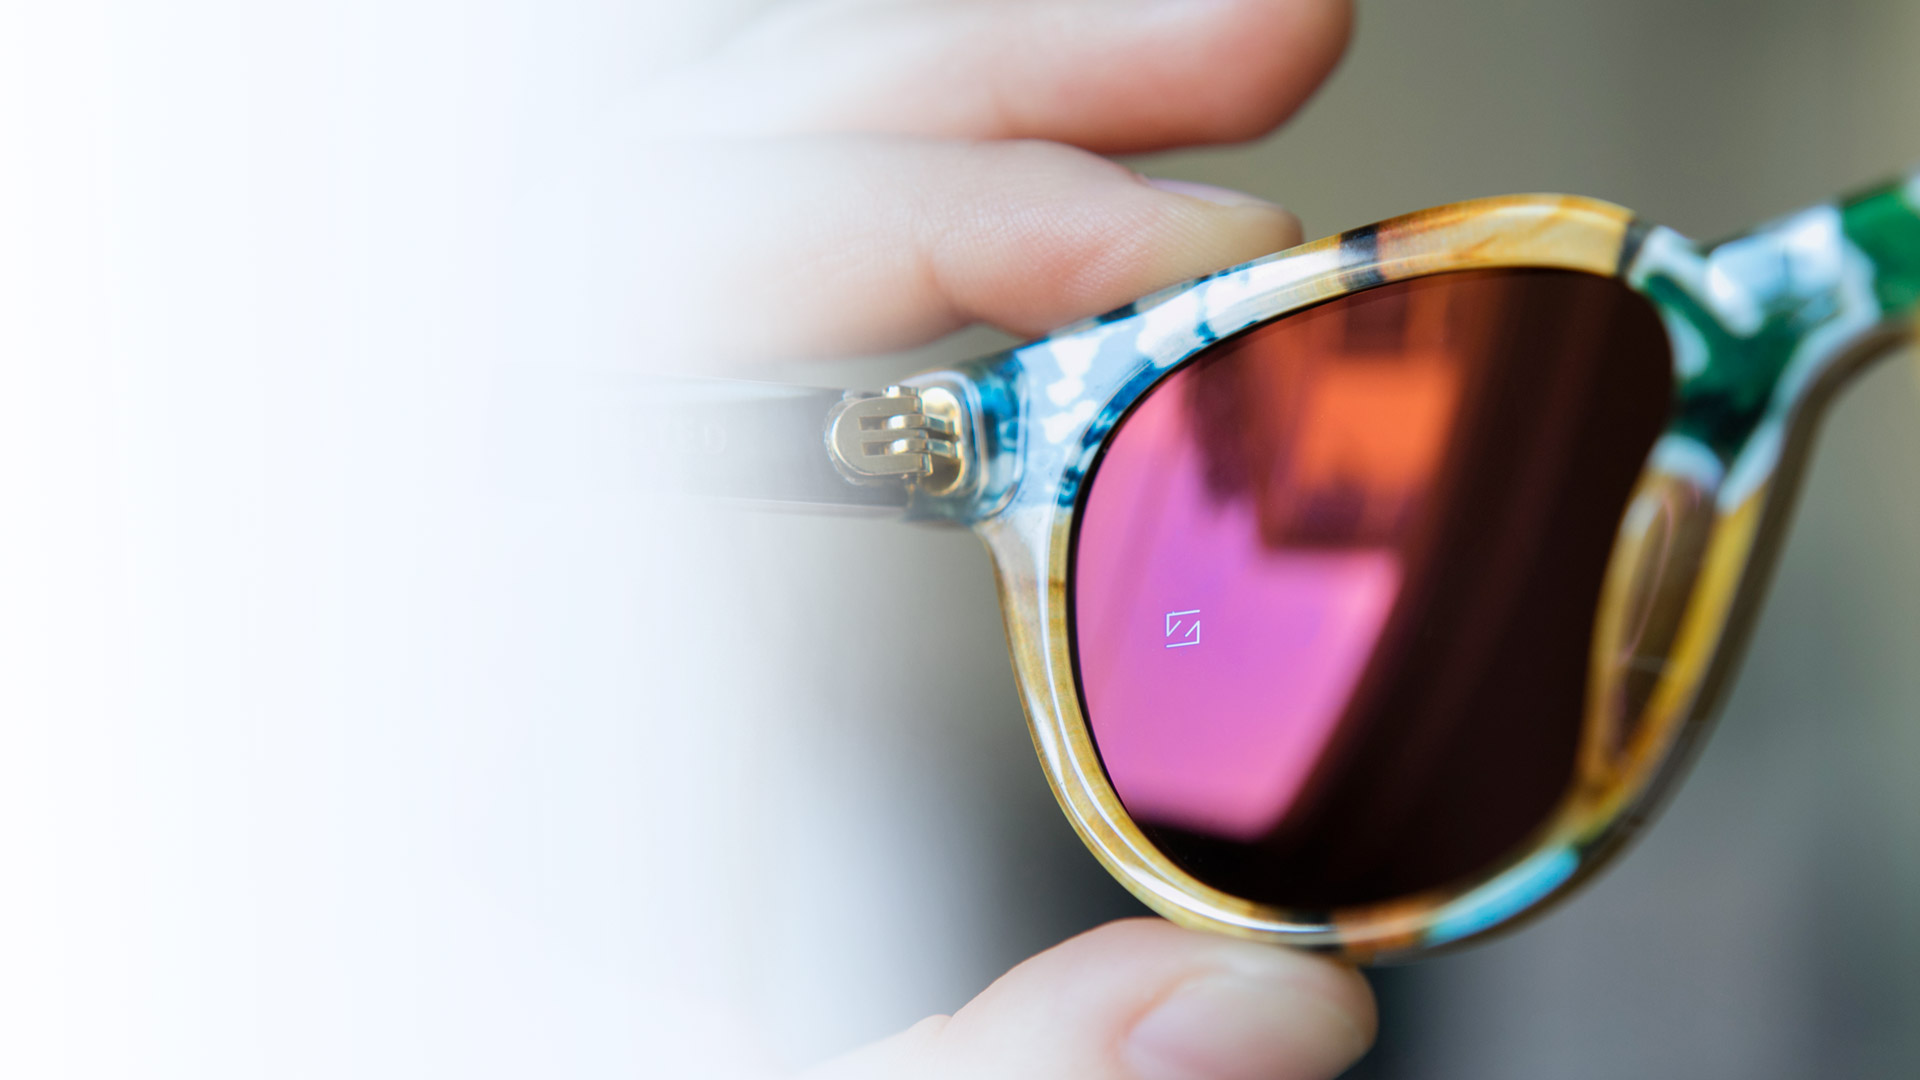 ZEISS Sunglass lenses – your perfect companion in the sun